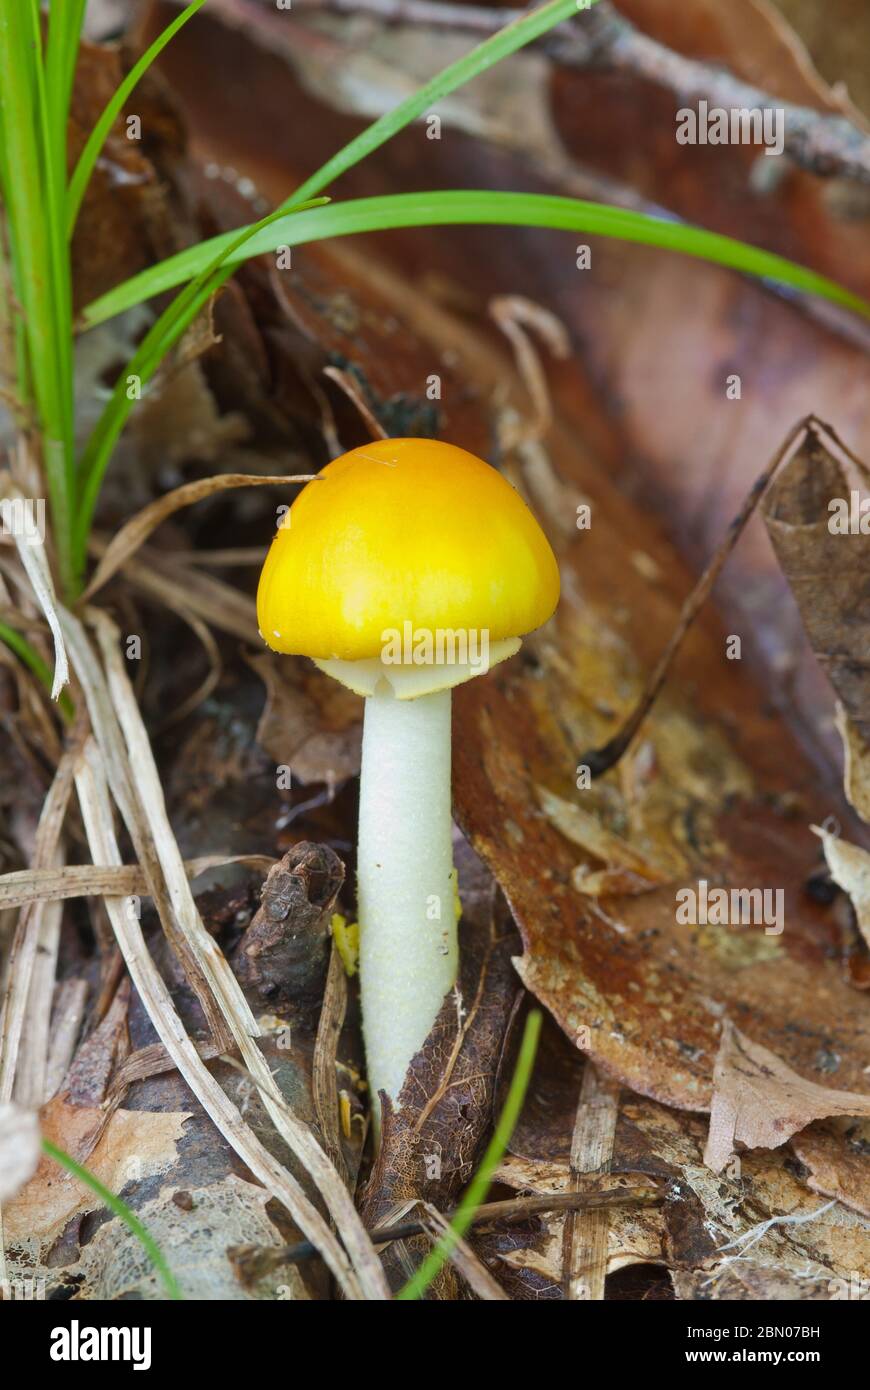 A yellow field mushroom, Bolbitius vitellinus, also known as Bolbitius titubans, growing through the leaf litter in a wooded area in eastern Ontario. Stock Photo